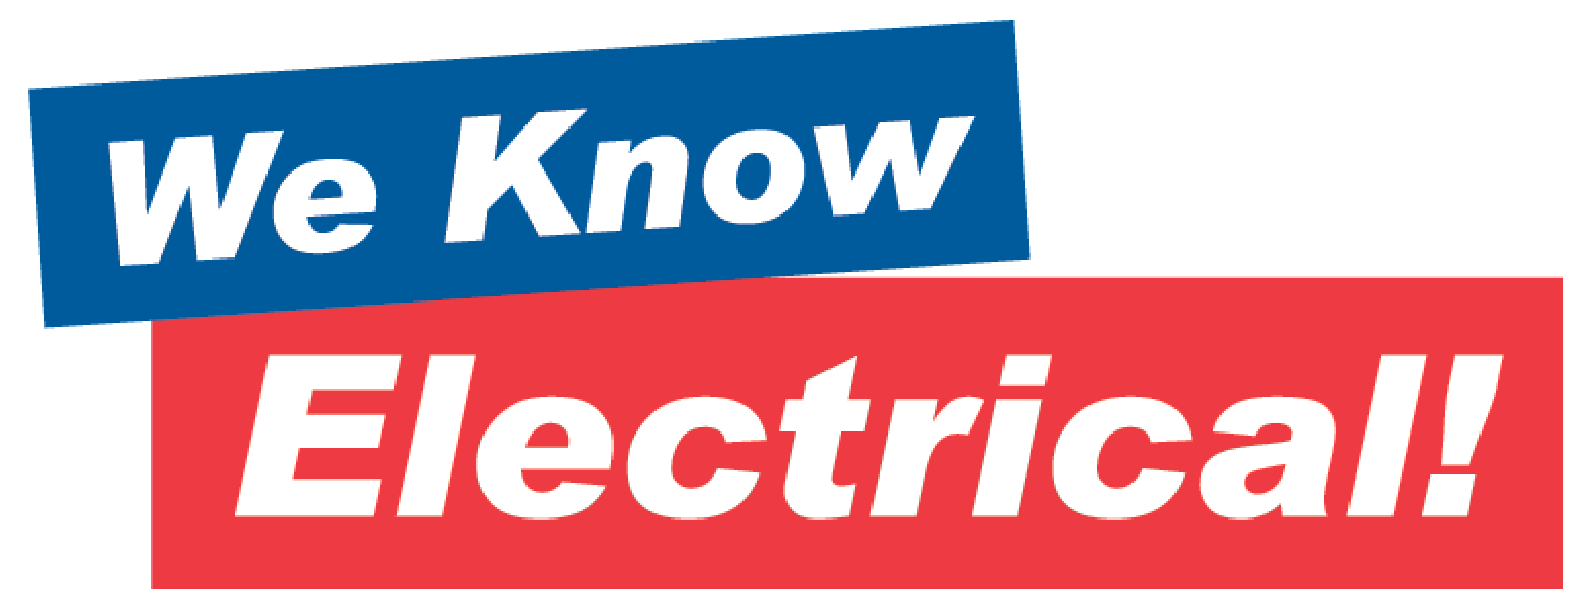 We Know Electrical